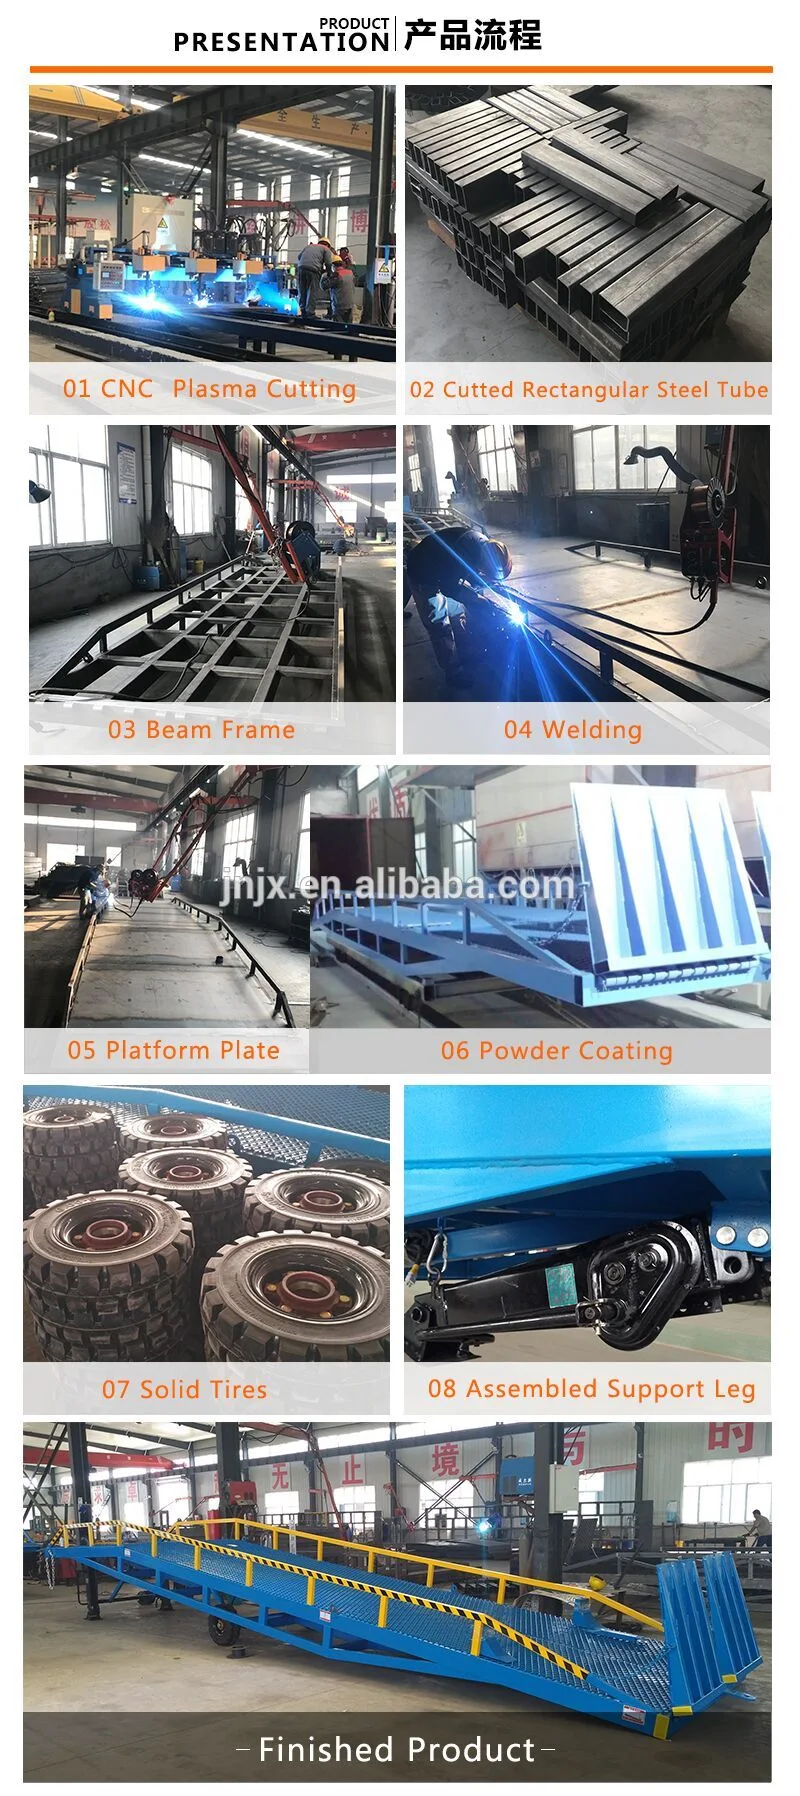 Mobile Forklift Container Loading Equipment Hydraulic Truck Unloading Lift